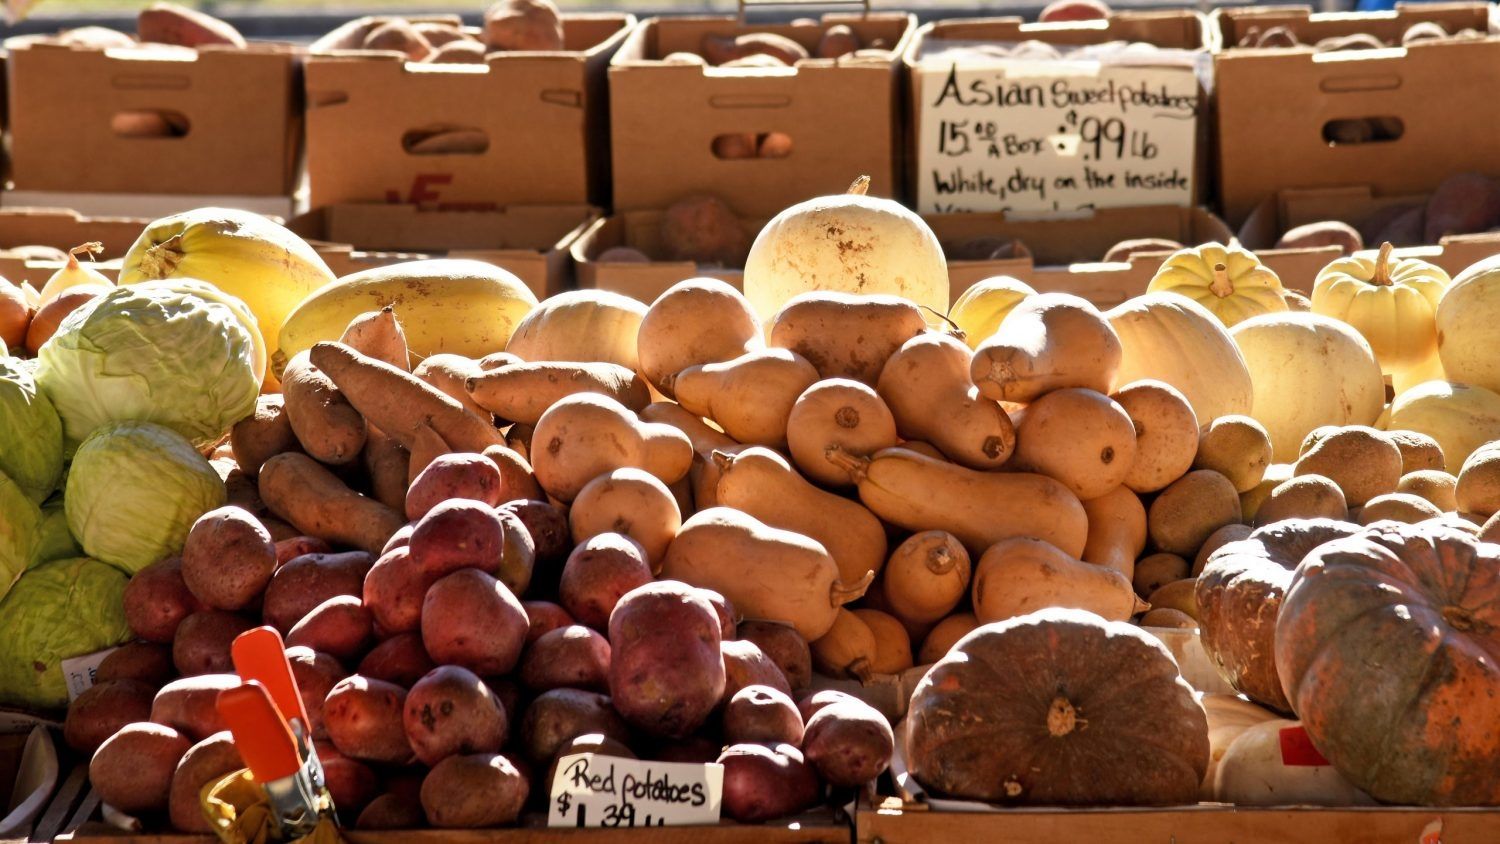 Grounds and other produce displayed at a farmers market stand